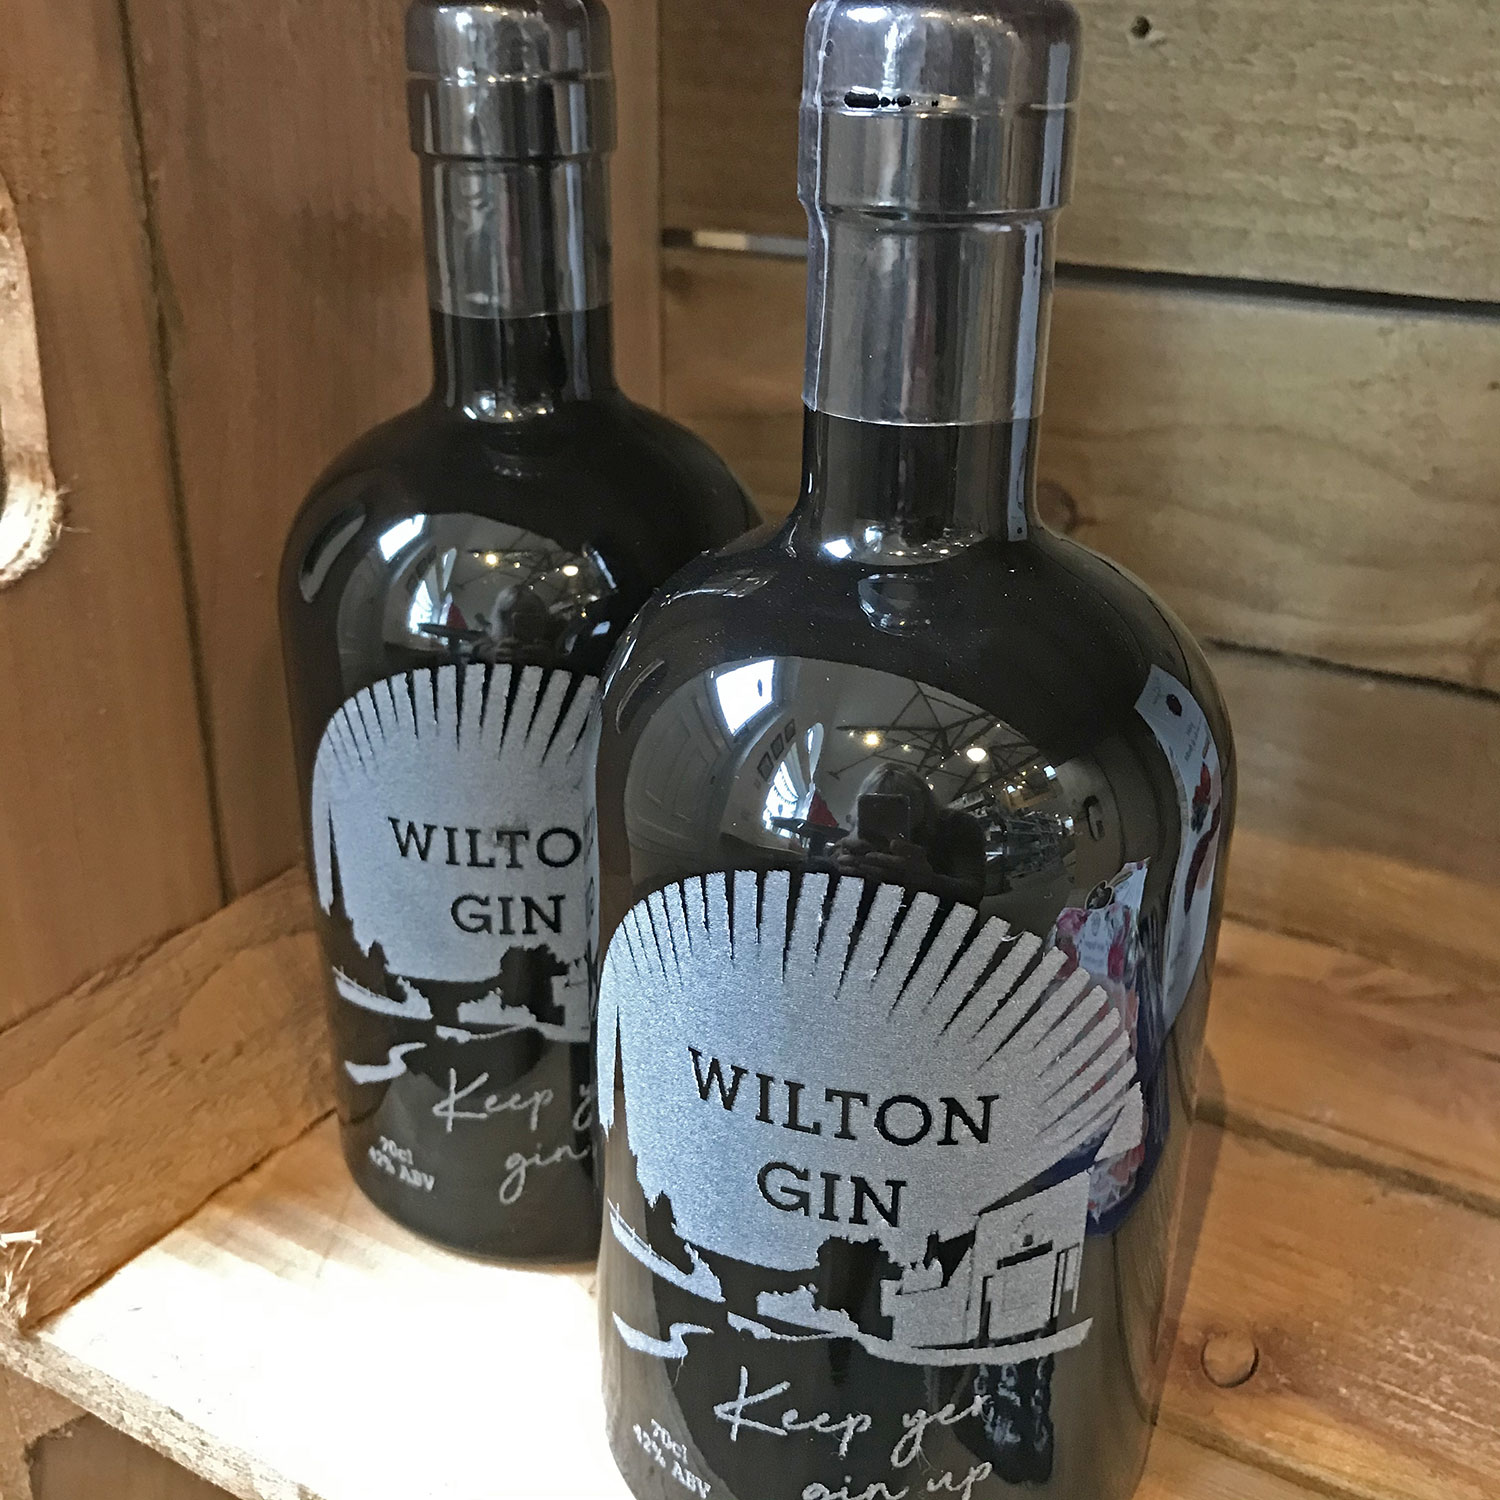 Our very own 'Wilton Gin' is made just down the road by Hooting Owl.